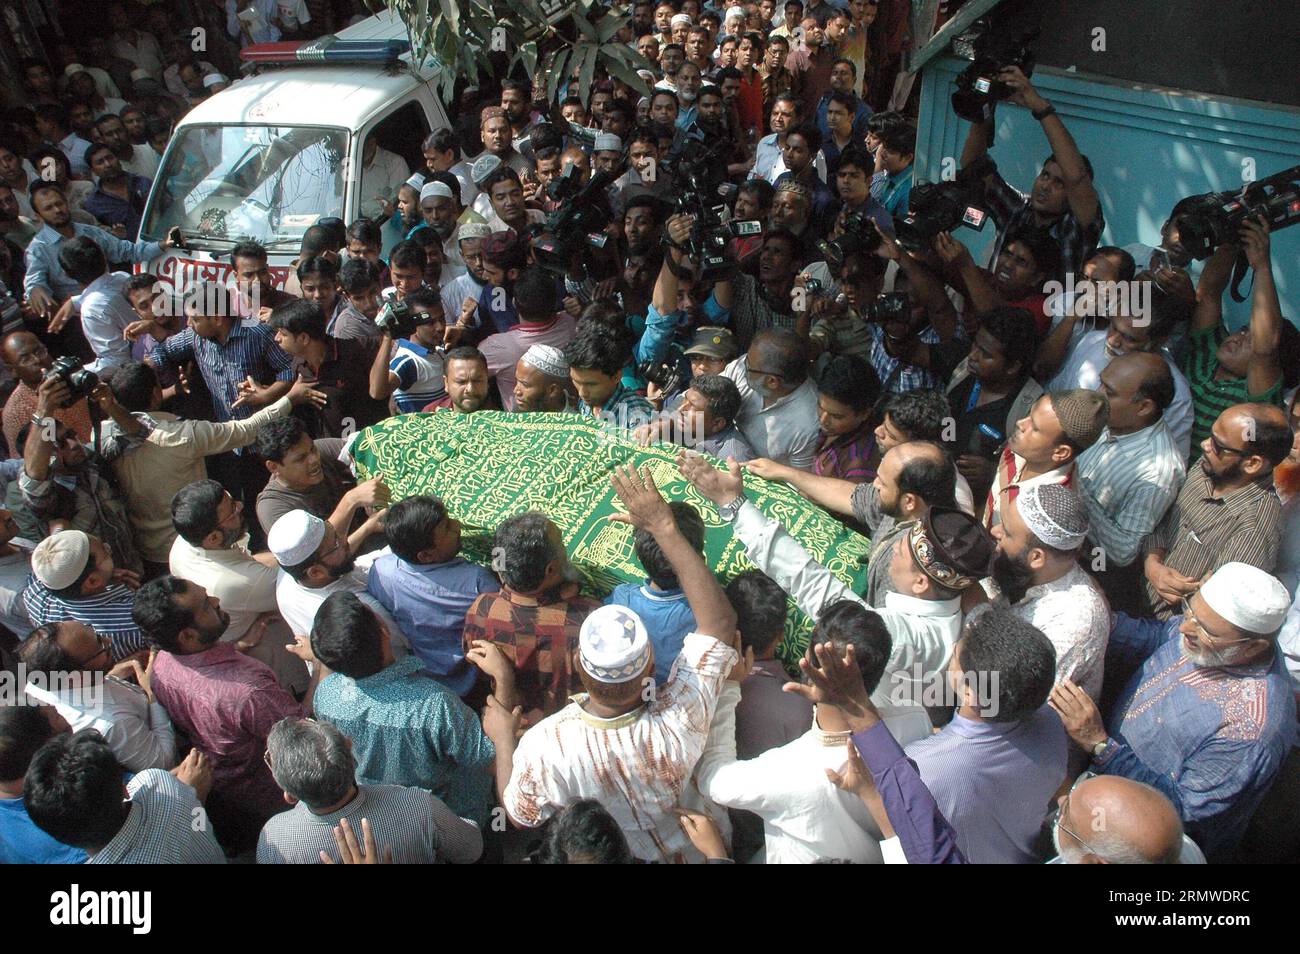 (141024) -- DHAKA, Oct. 24, 2014 -- Thousands of people pay their last respects to the former chief of Bangladesh s Islamist party Ghulam Azam after he died at his residence in Dhaka, Bangladesh, Oct. 24, 2014. Convicted war criminal Ghulam Azam, one of the most high profile leaders of Bangladesh s largest Islamist party, died on October 23. )(bxq) BANGLADESH-DHAKA-GHULAM AZAM-DEATH SharifulxIslam PUBLICATIONxNOTxINxCHN   Dhaka OCT 24 2014 thousands of Celebrities Pay their Load respects to The Former Chief of Bangladesh S Islamist Party Ghulam Azam After he died AT His Residence in Dhaka Bang Stock Photo